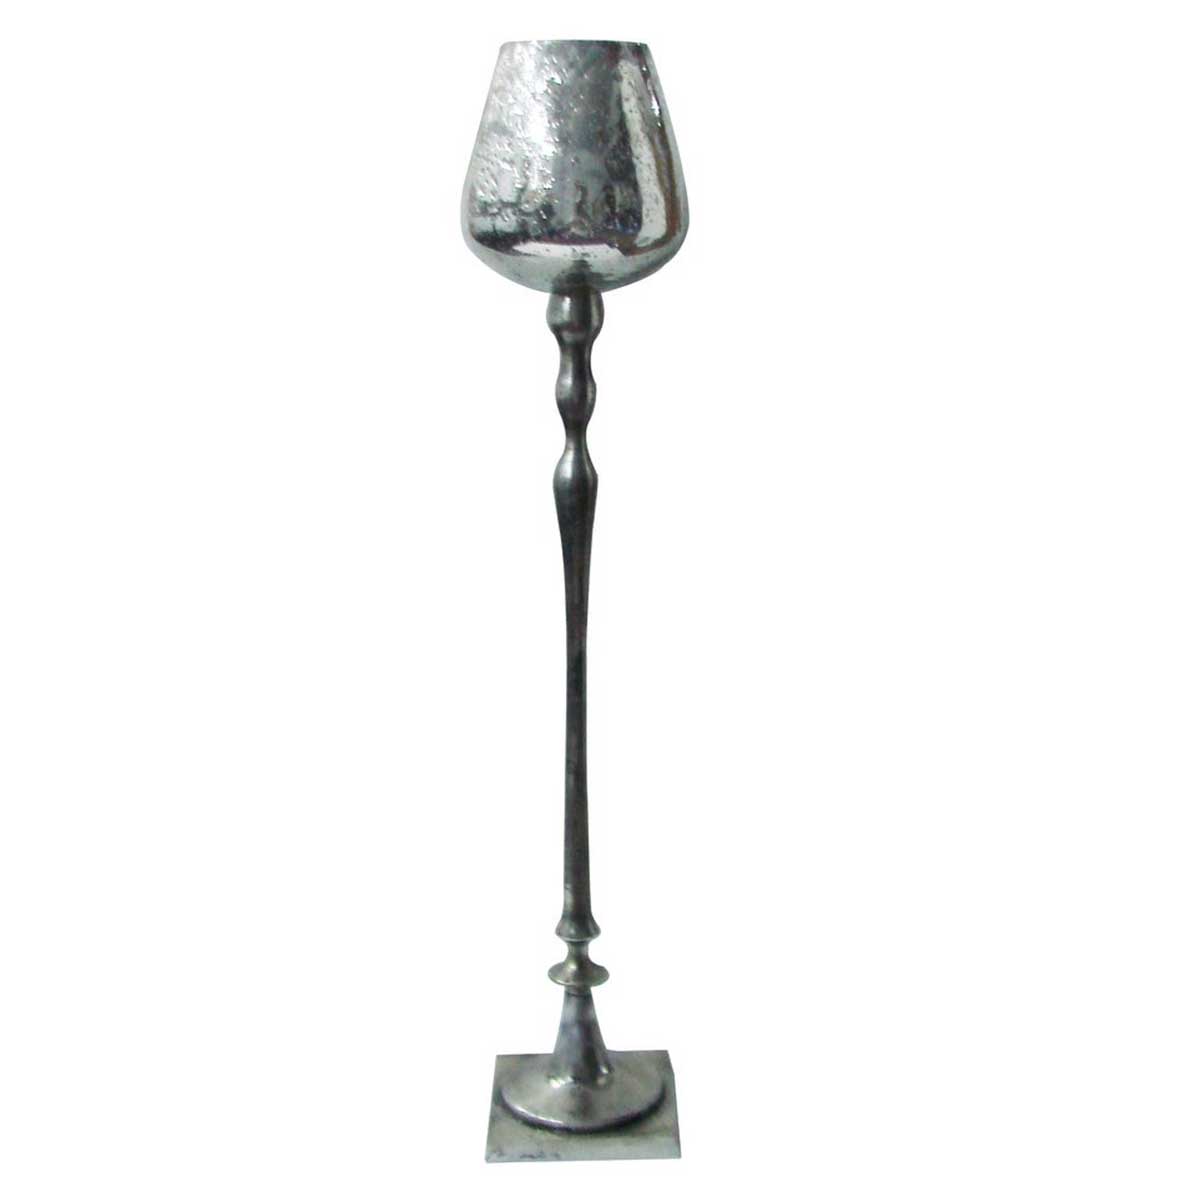 A & B Home Keavy Tall Aluminum Candle Holder